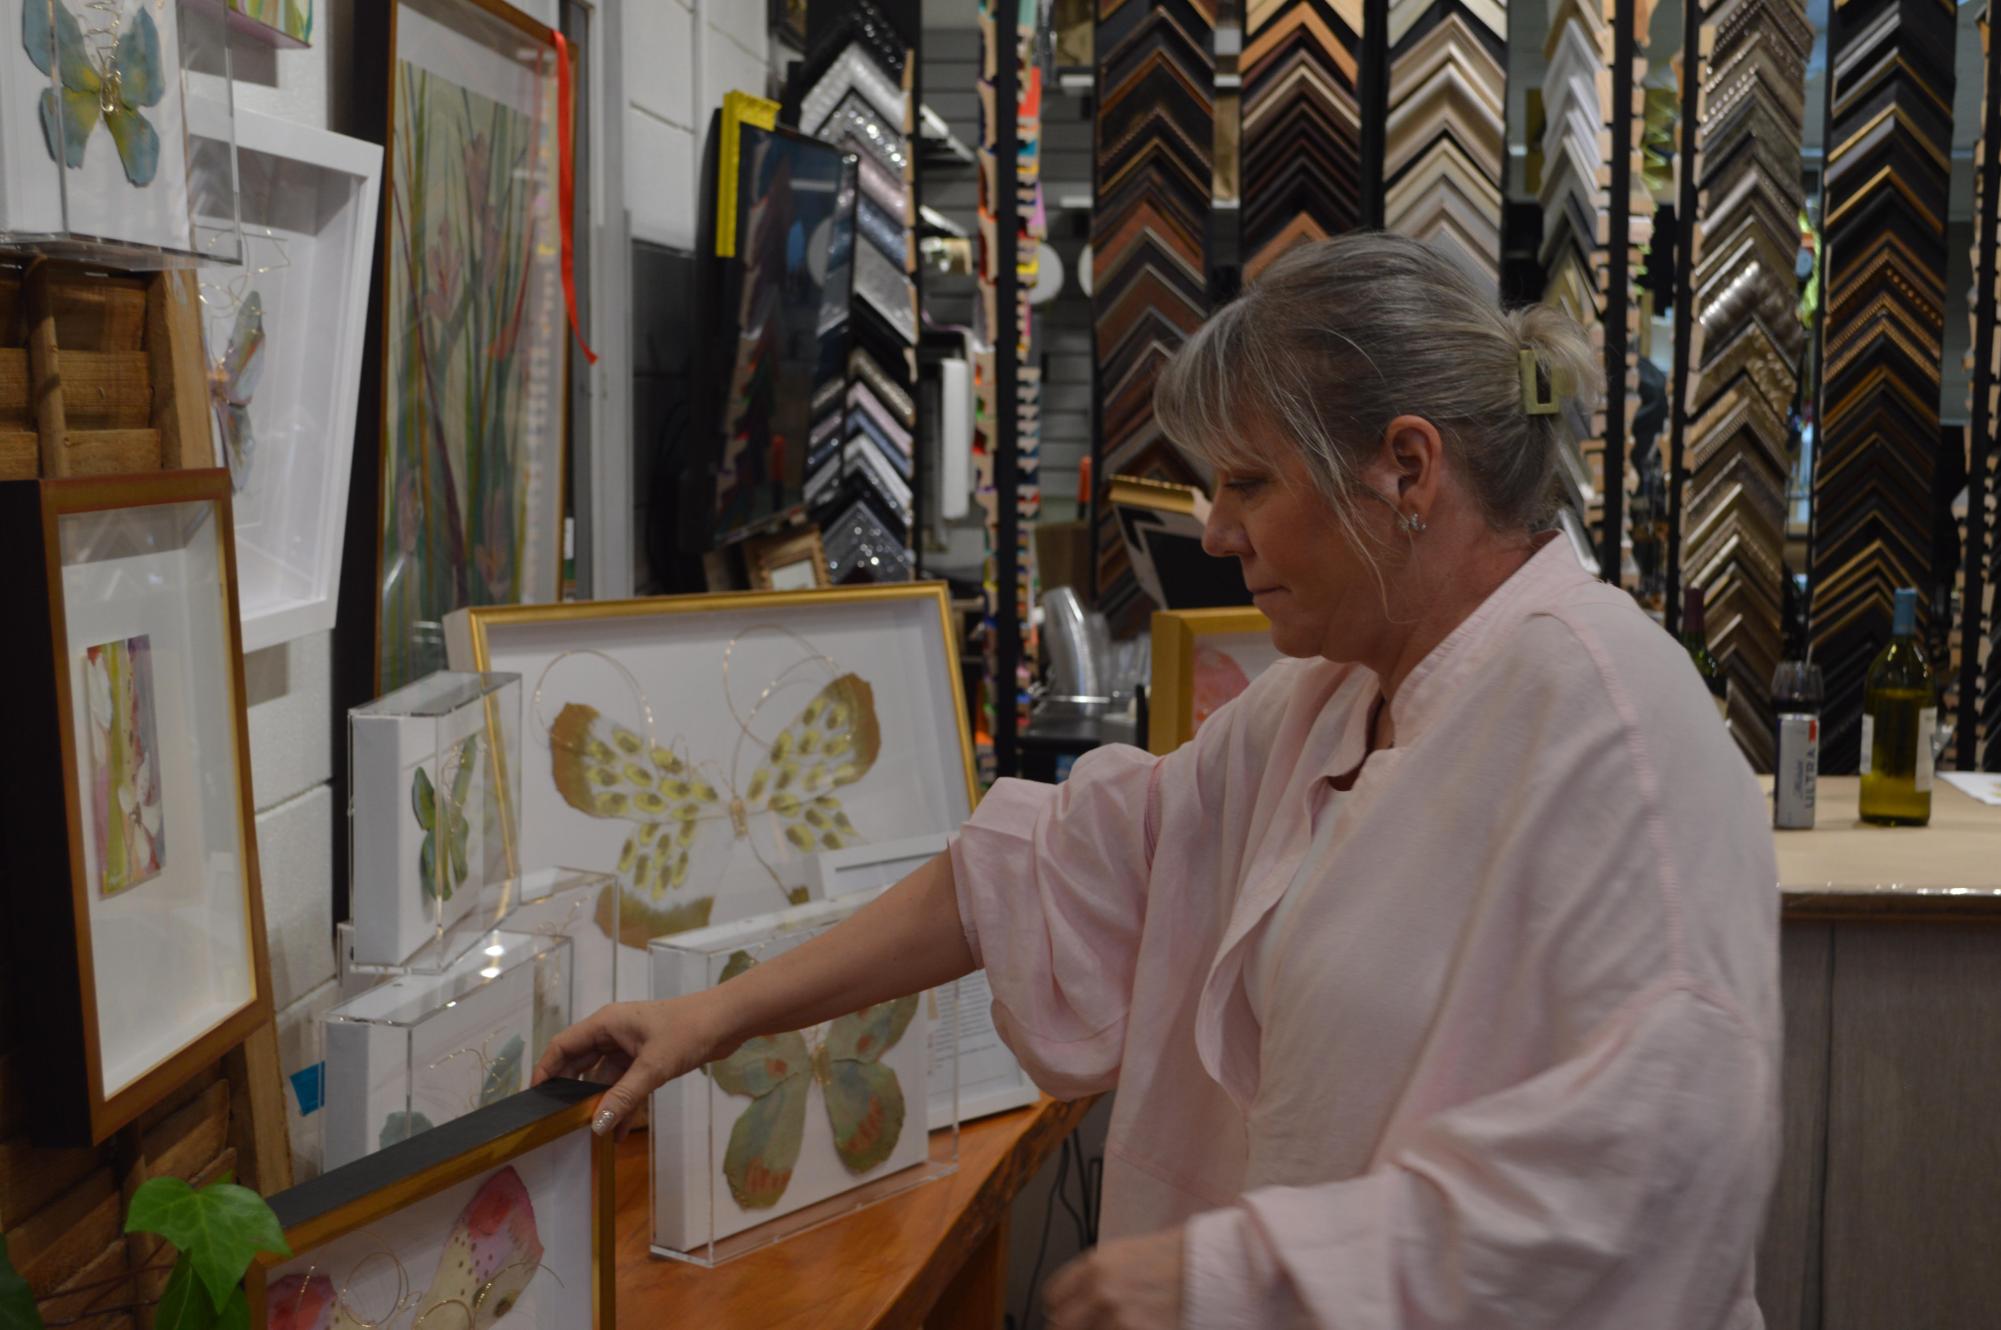 Proud moment… Kelley Lyons owner of Lyons Share Gallery admires her art.